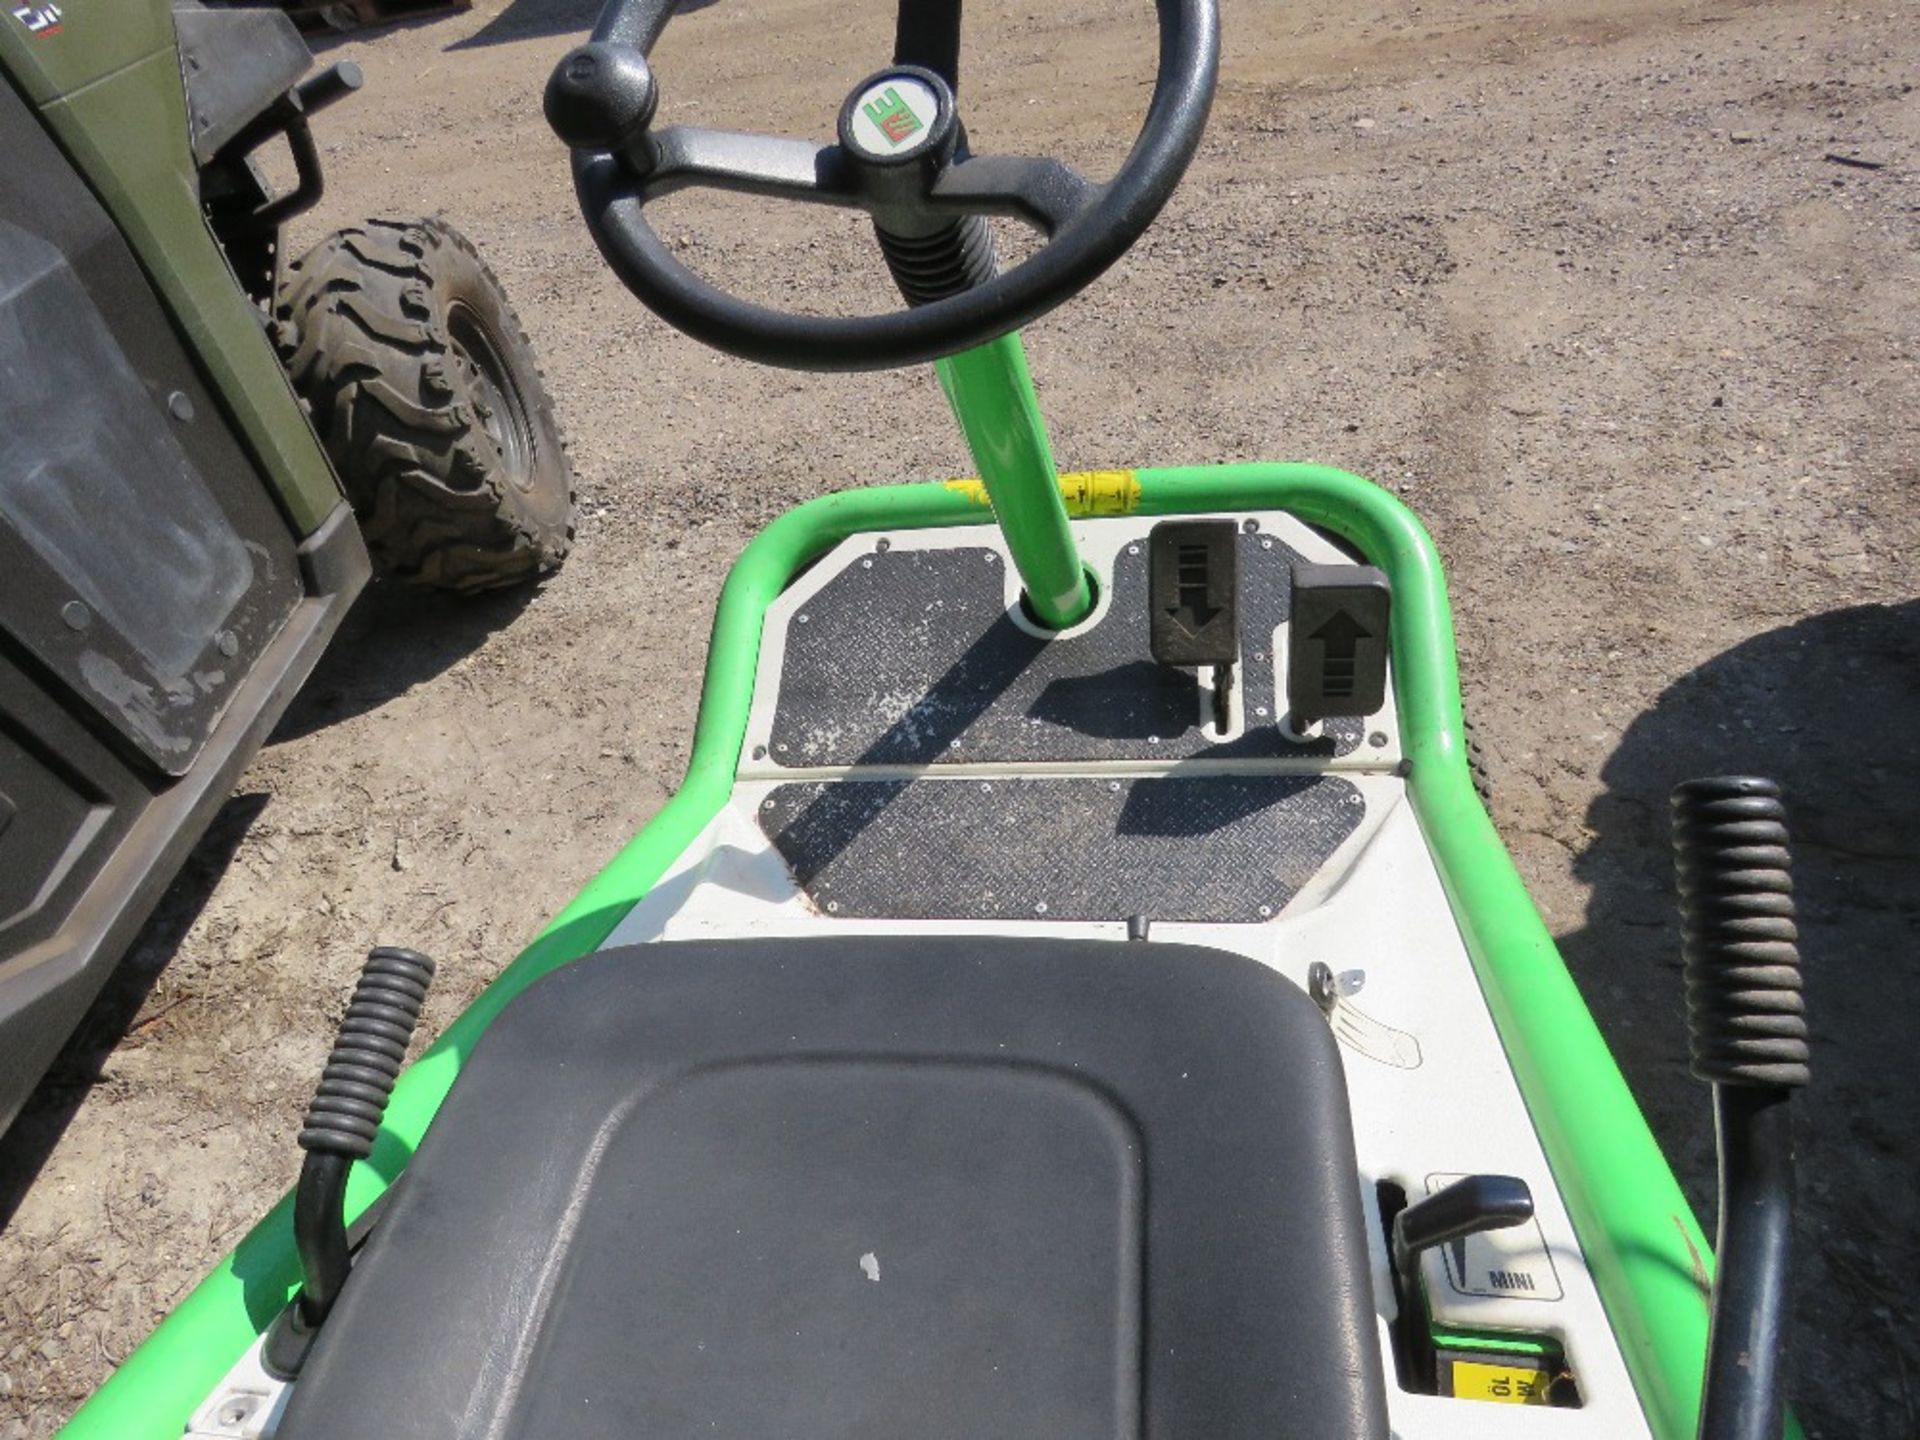 ETESIA PROFESSIONAL HYDRO RIDE ON MOWER WITH REAR COLLECTOR. WHEN TESTED WAS SEEN TO RUN AND DRIVE A - Image 7 of 9